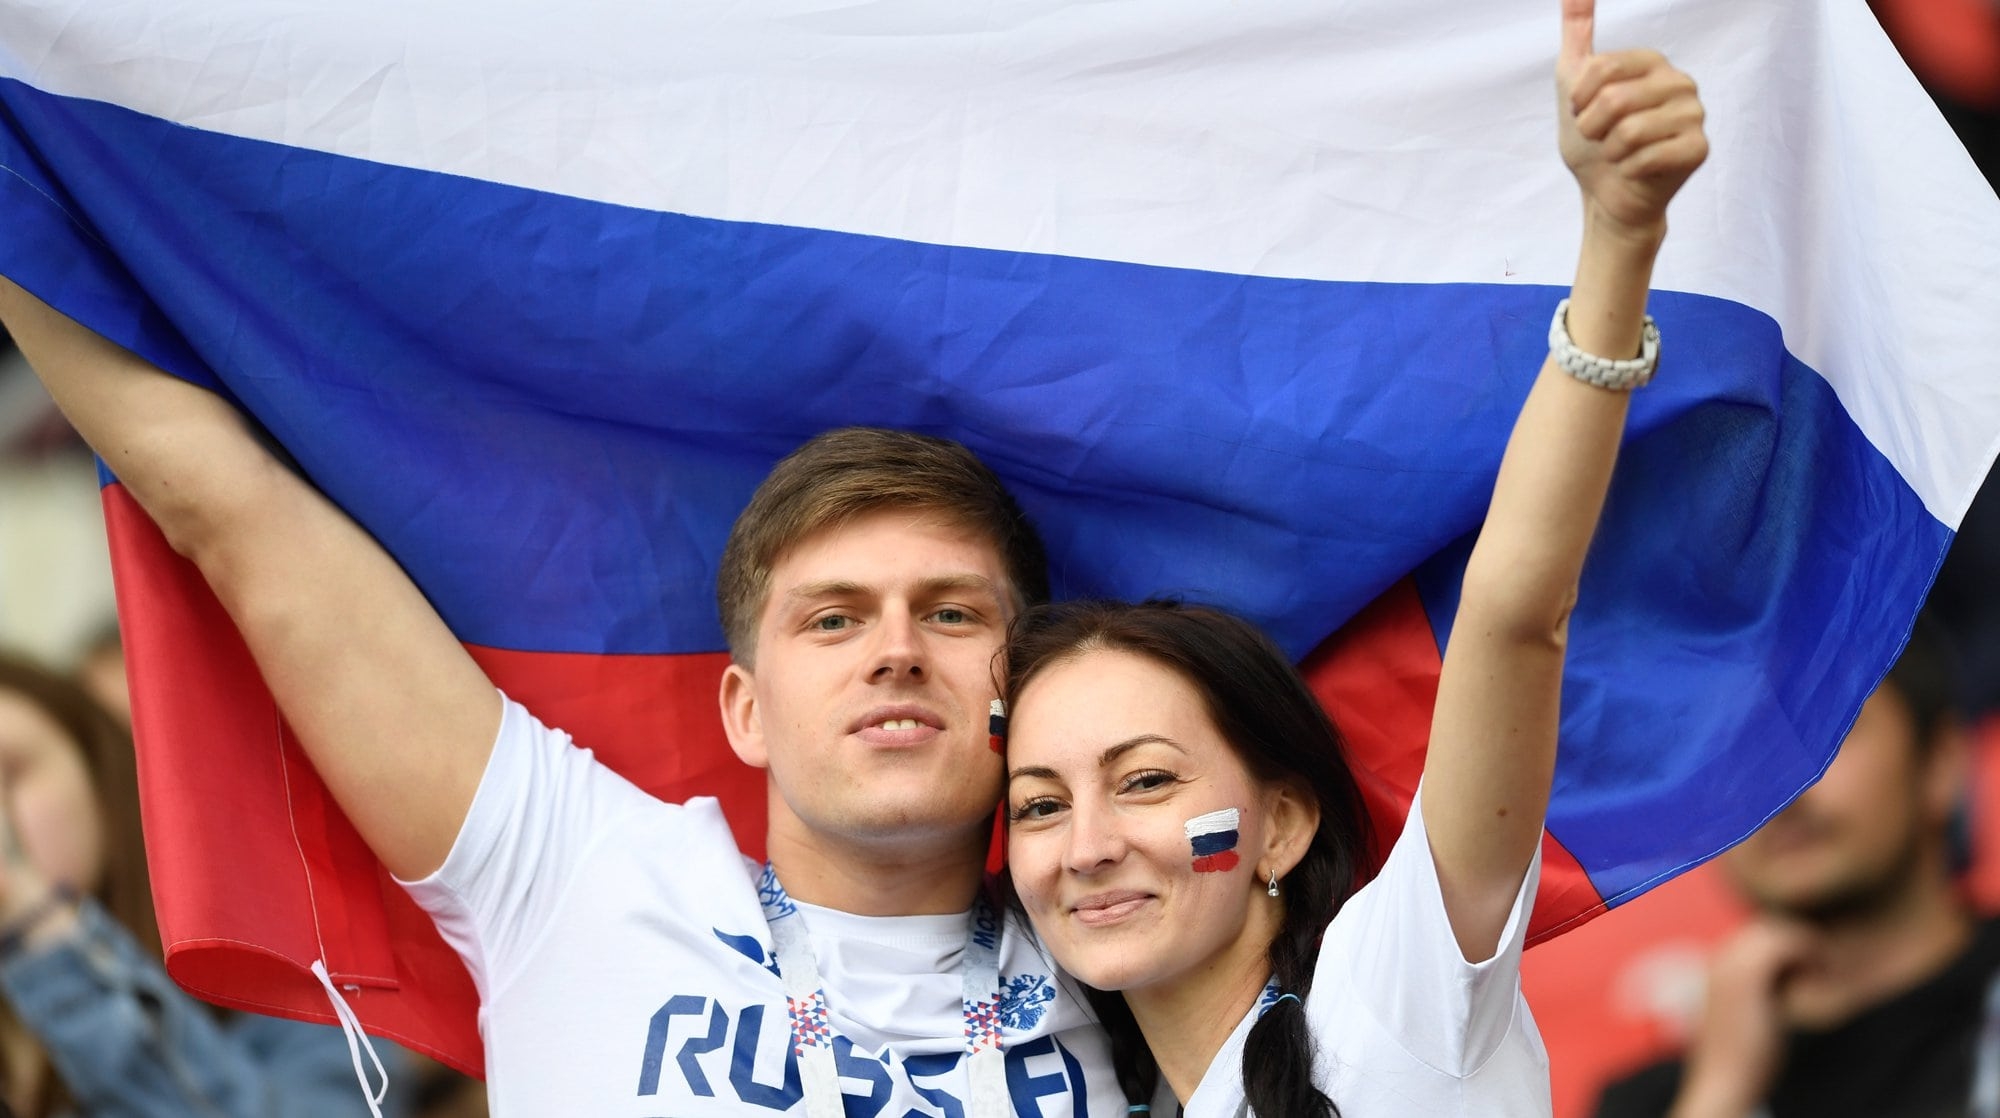 Young people in russia